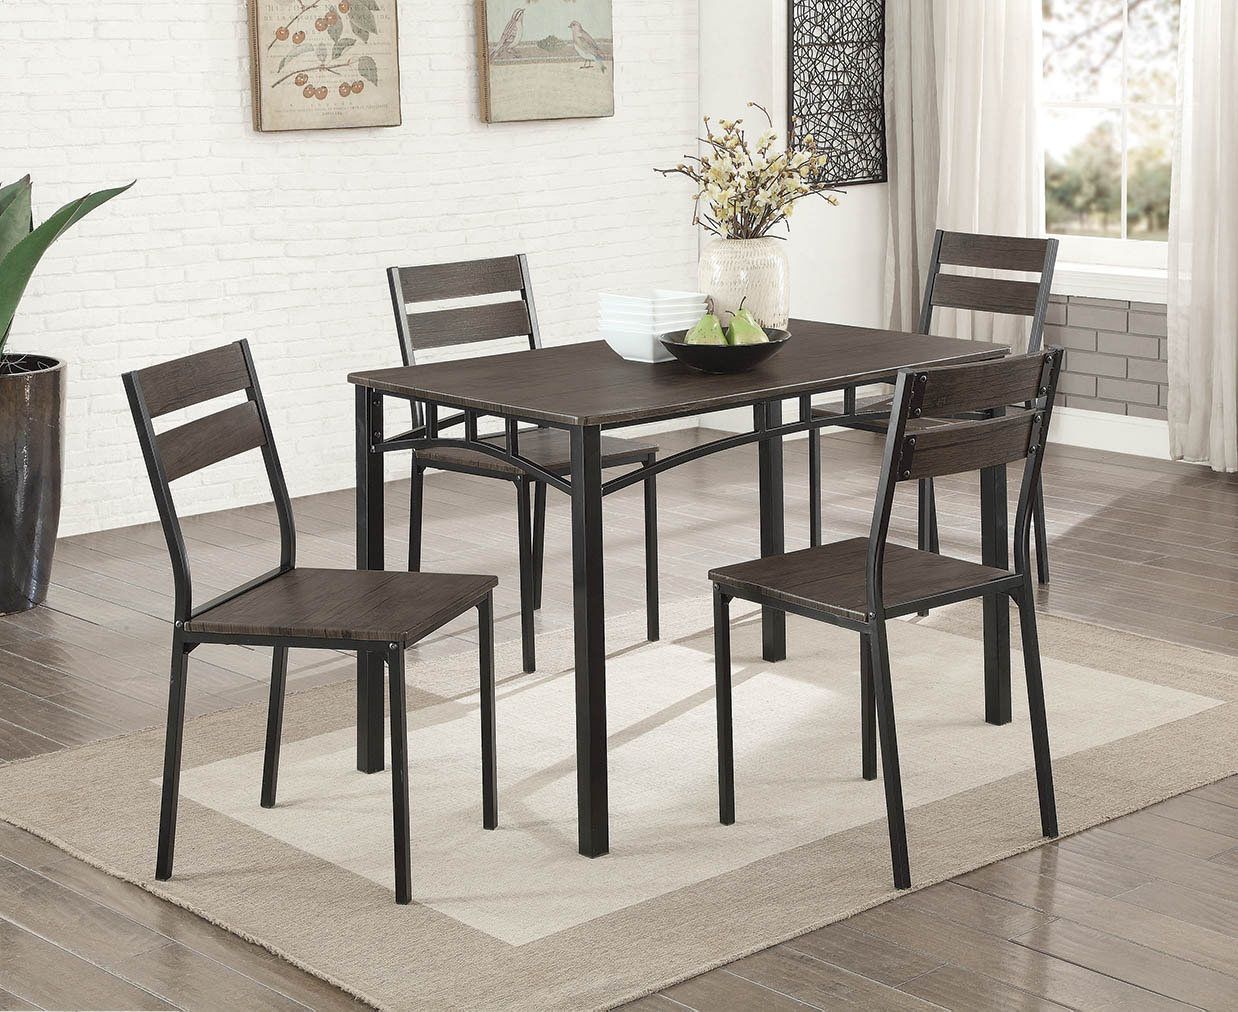 Featured Image of Autberry 5 Piece Dining Sets